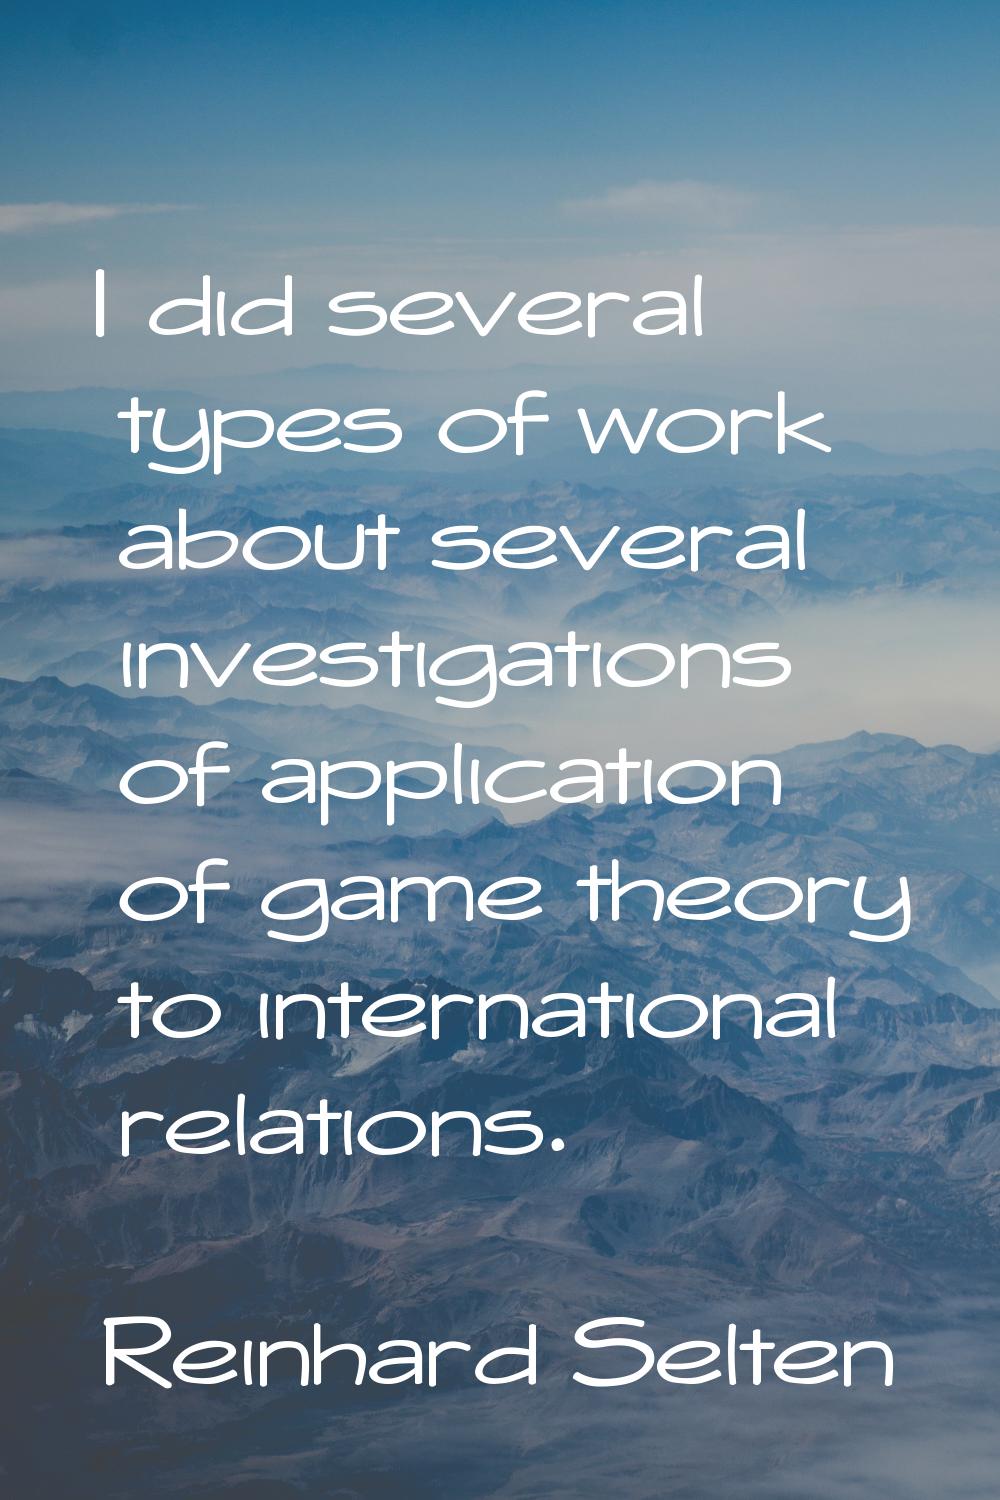 I did several types of work about several investigations of application of game theory to internati